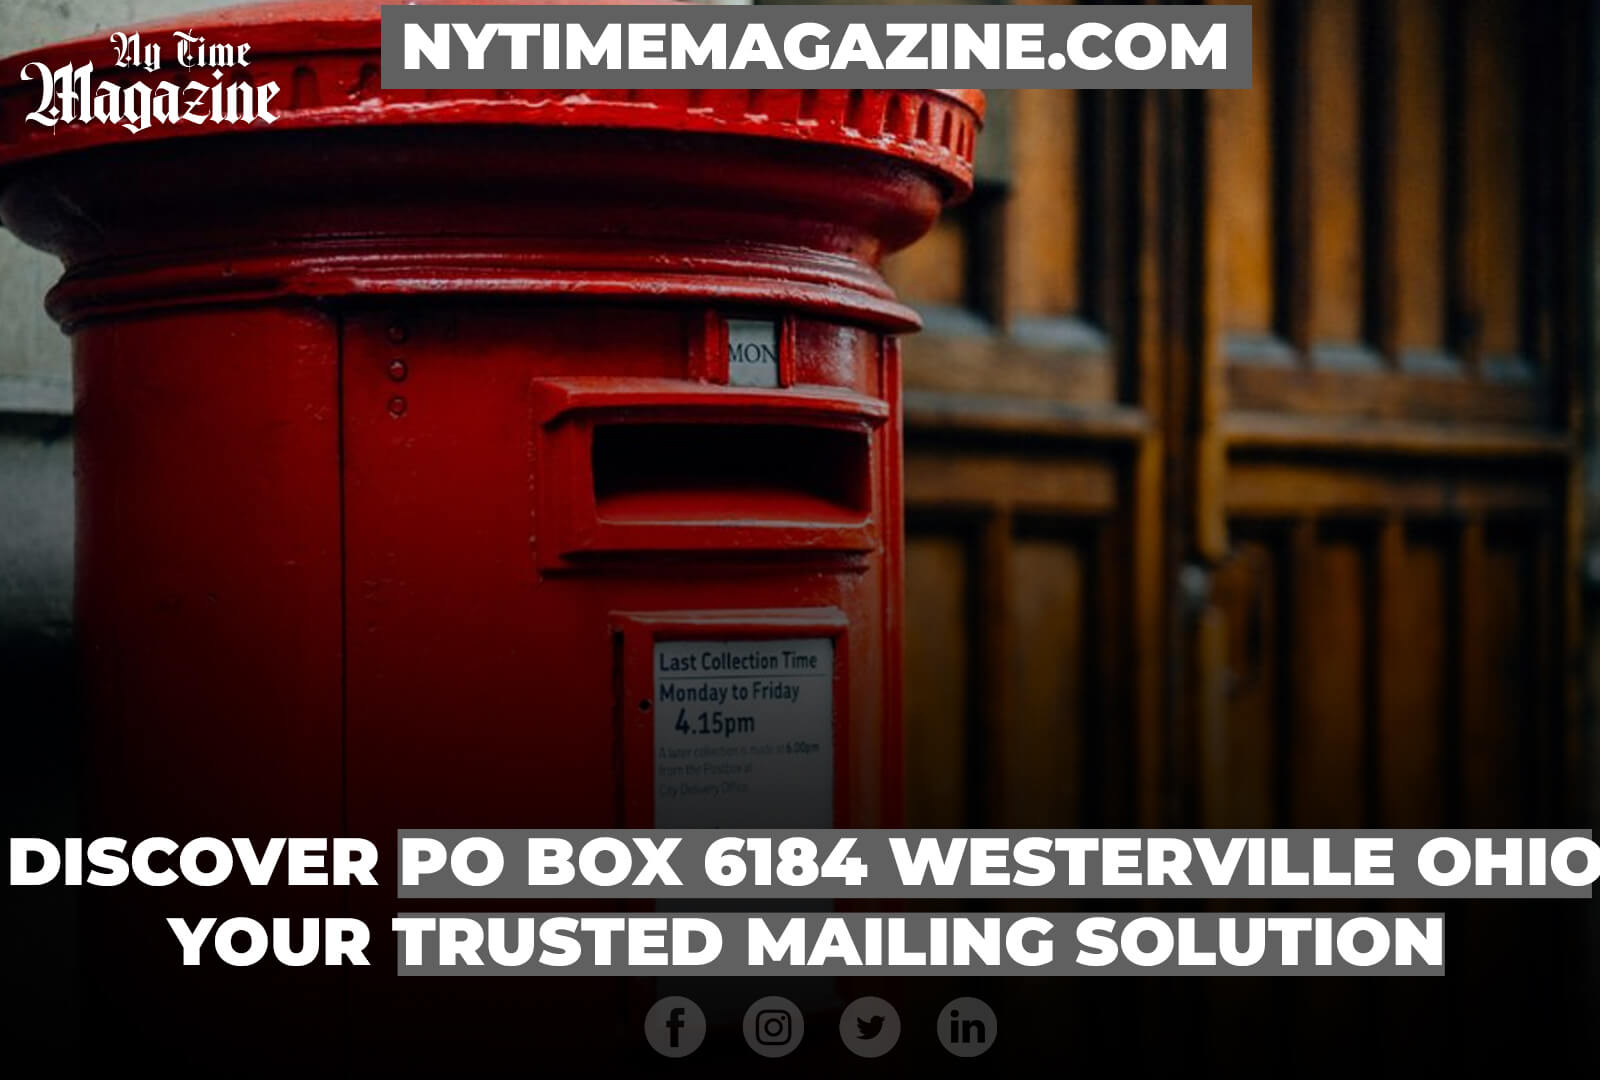 Discover Po Box 6184 Westerville Ohio - Your Trusted Mailing Solution